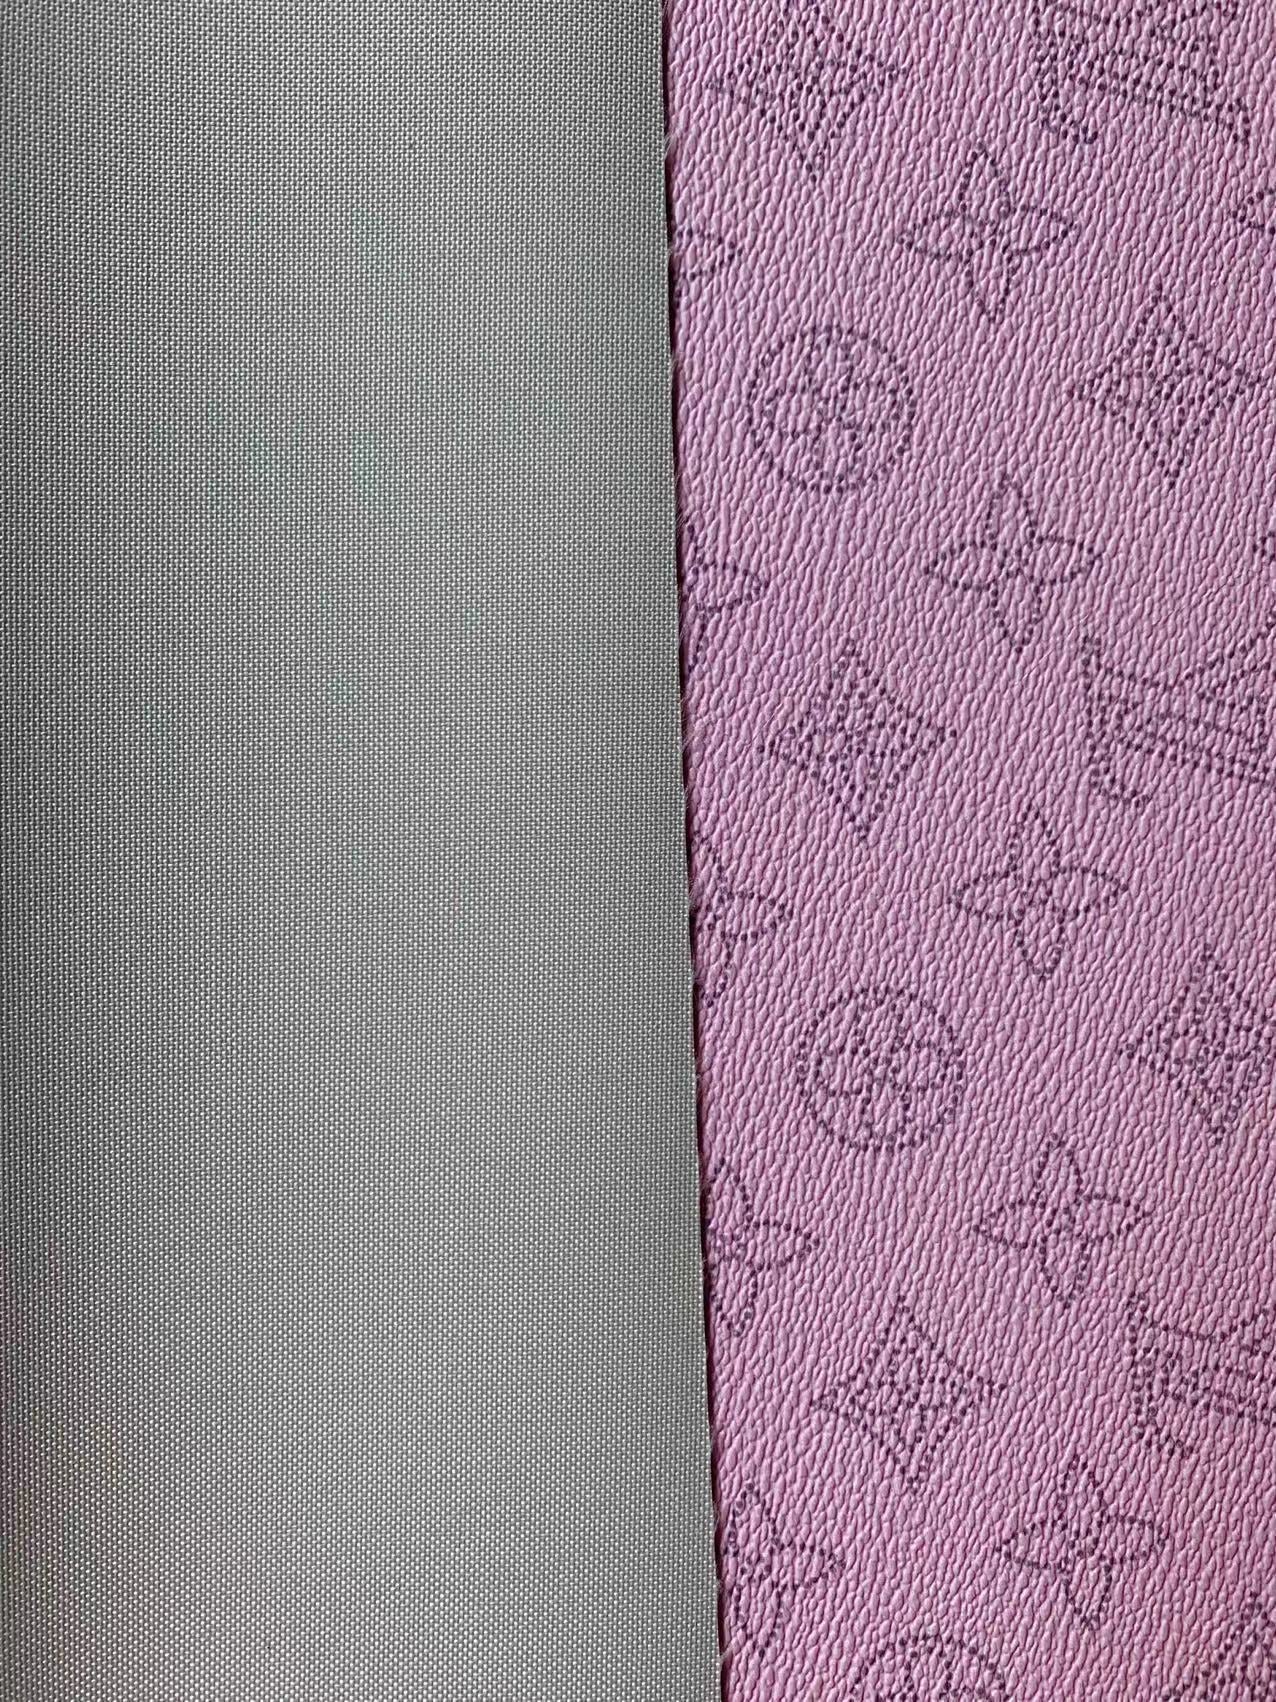 Classic Pink LV Pencils Design crafting leather fabric For